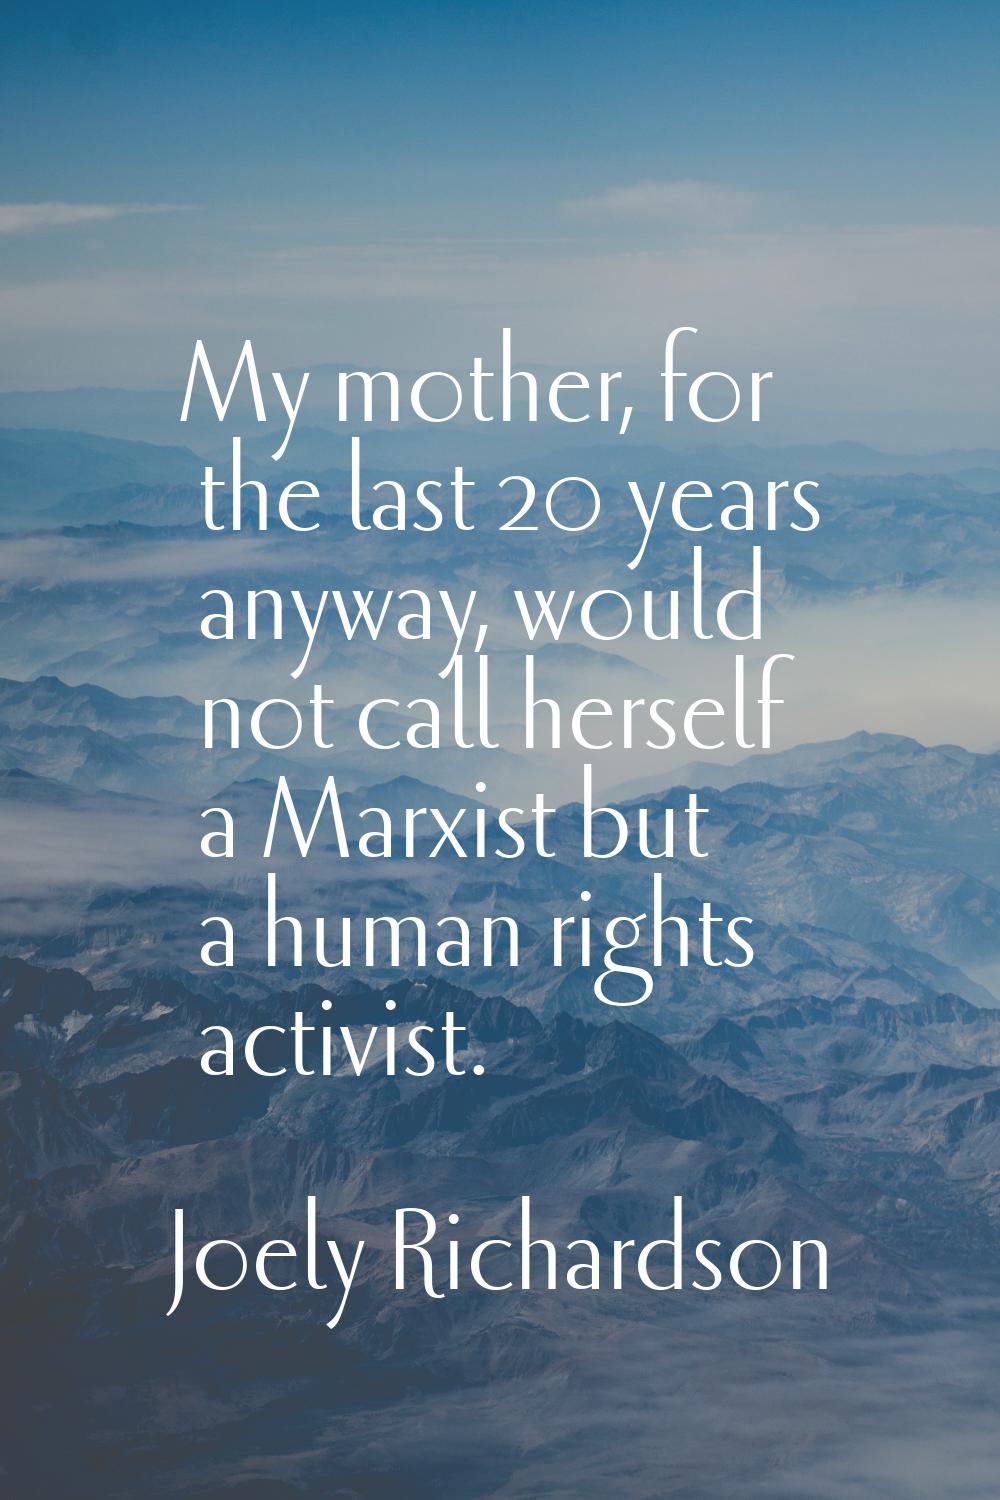 My mother, for the last 20 years anyway, would not call herself a Marxist but a human rights activi